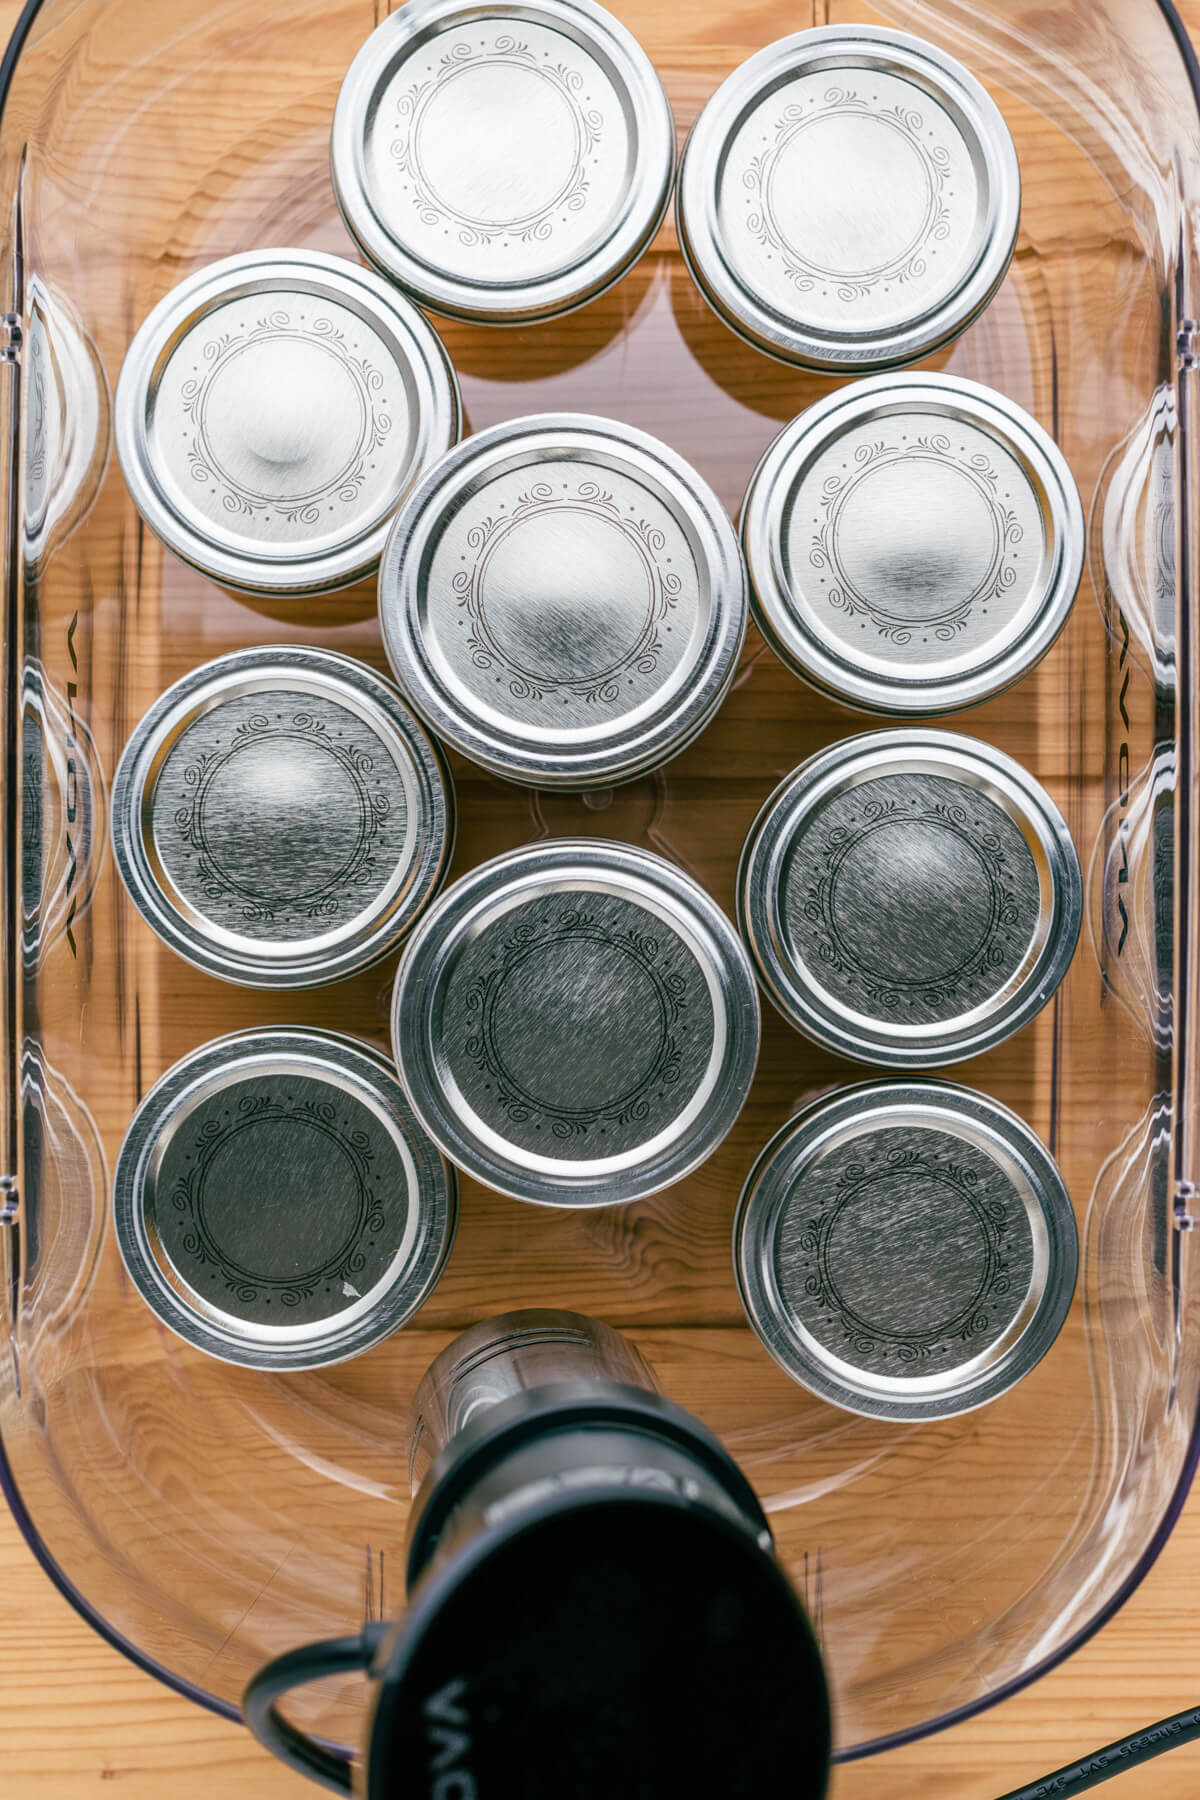 Jars arranged in a sous vide container on a wooden table.